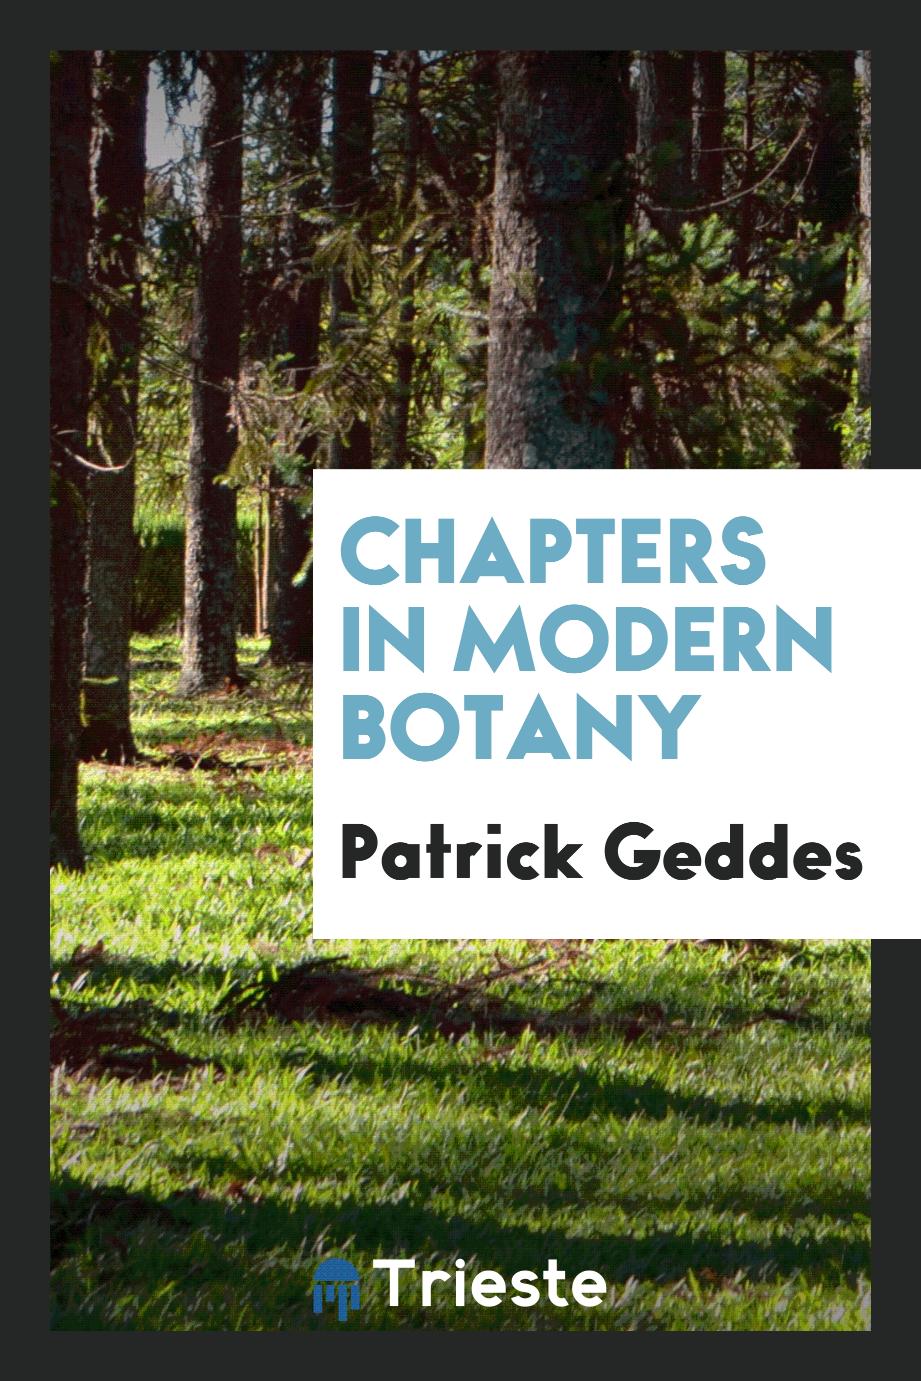 Chapters in modern botany